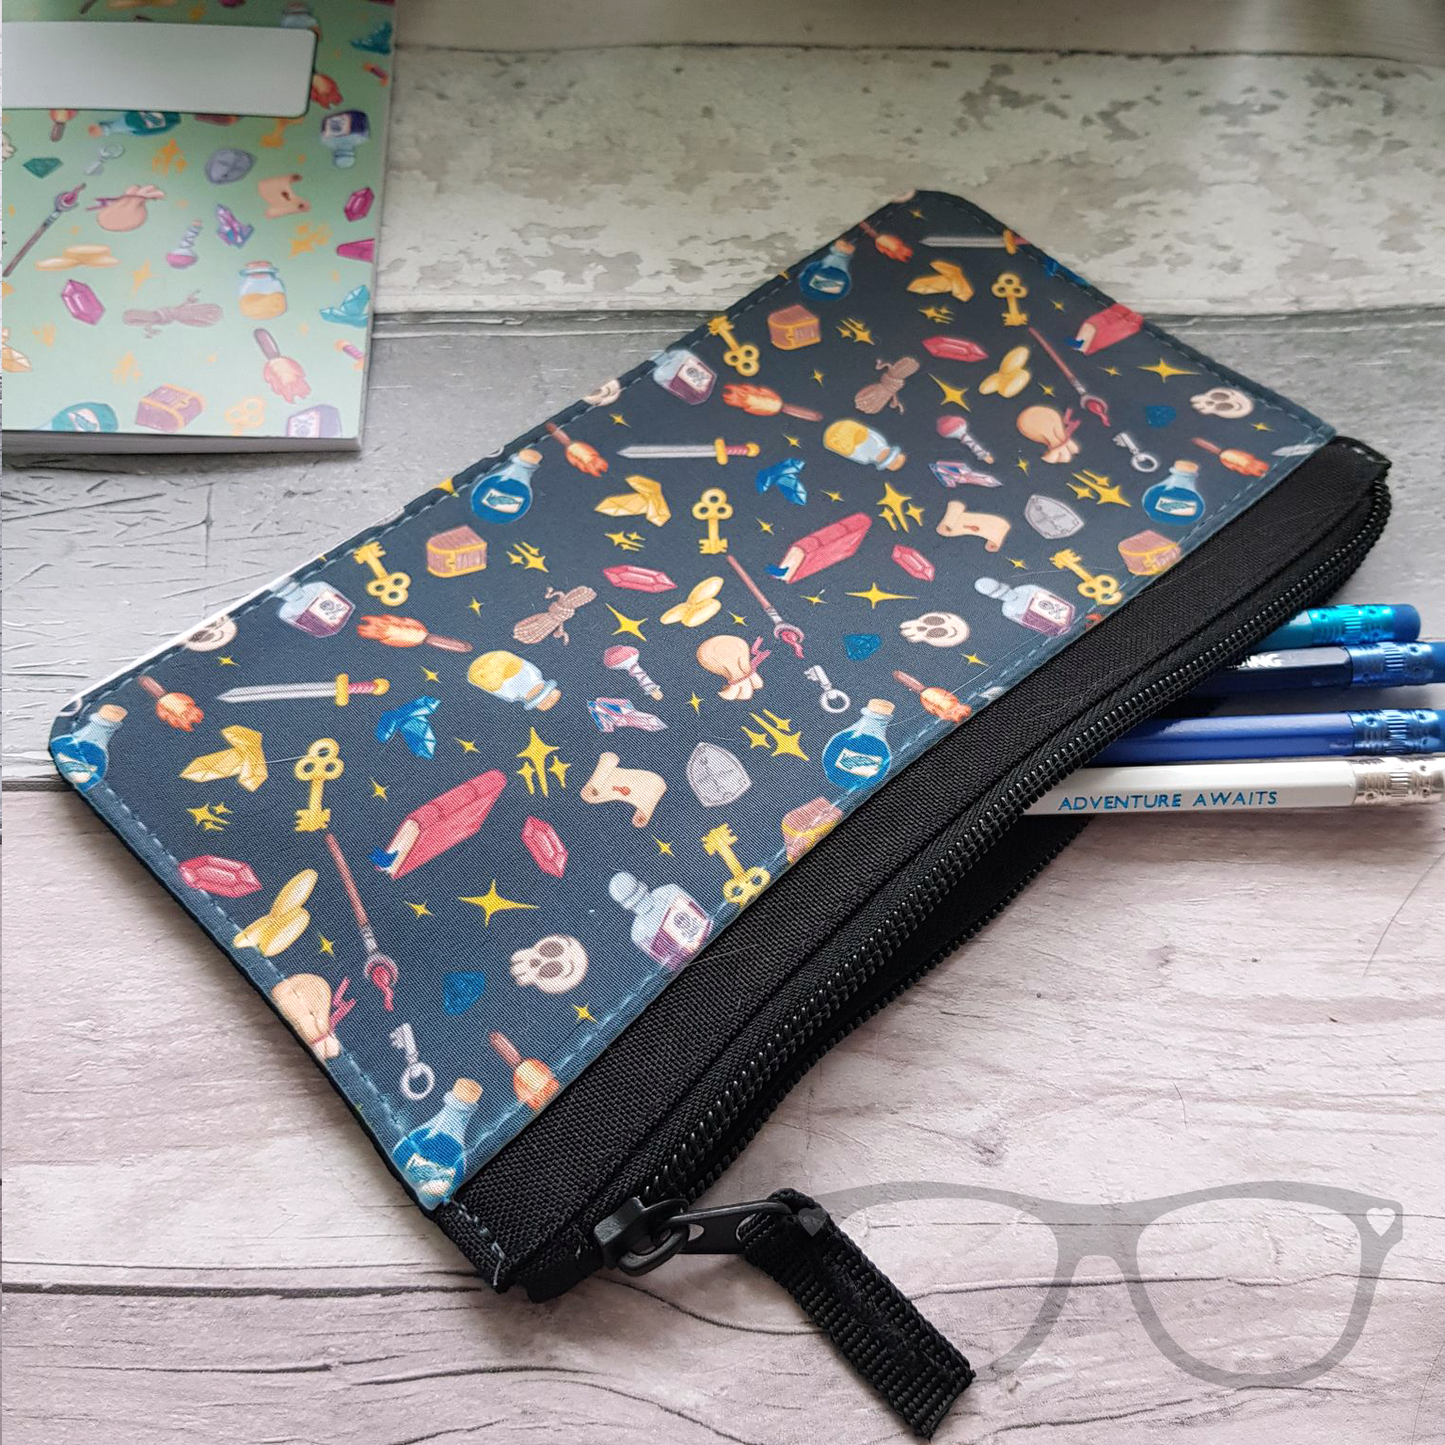 Fantasy pattern on a pencil case that fastens with a zipper